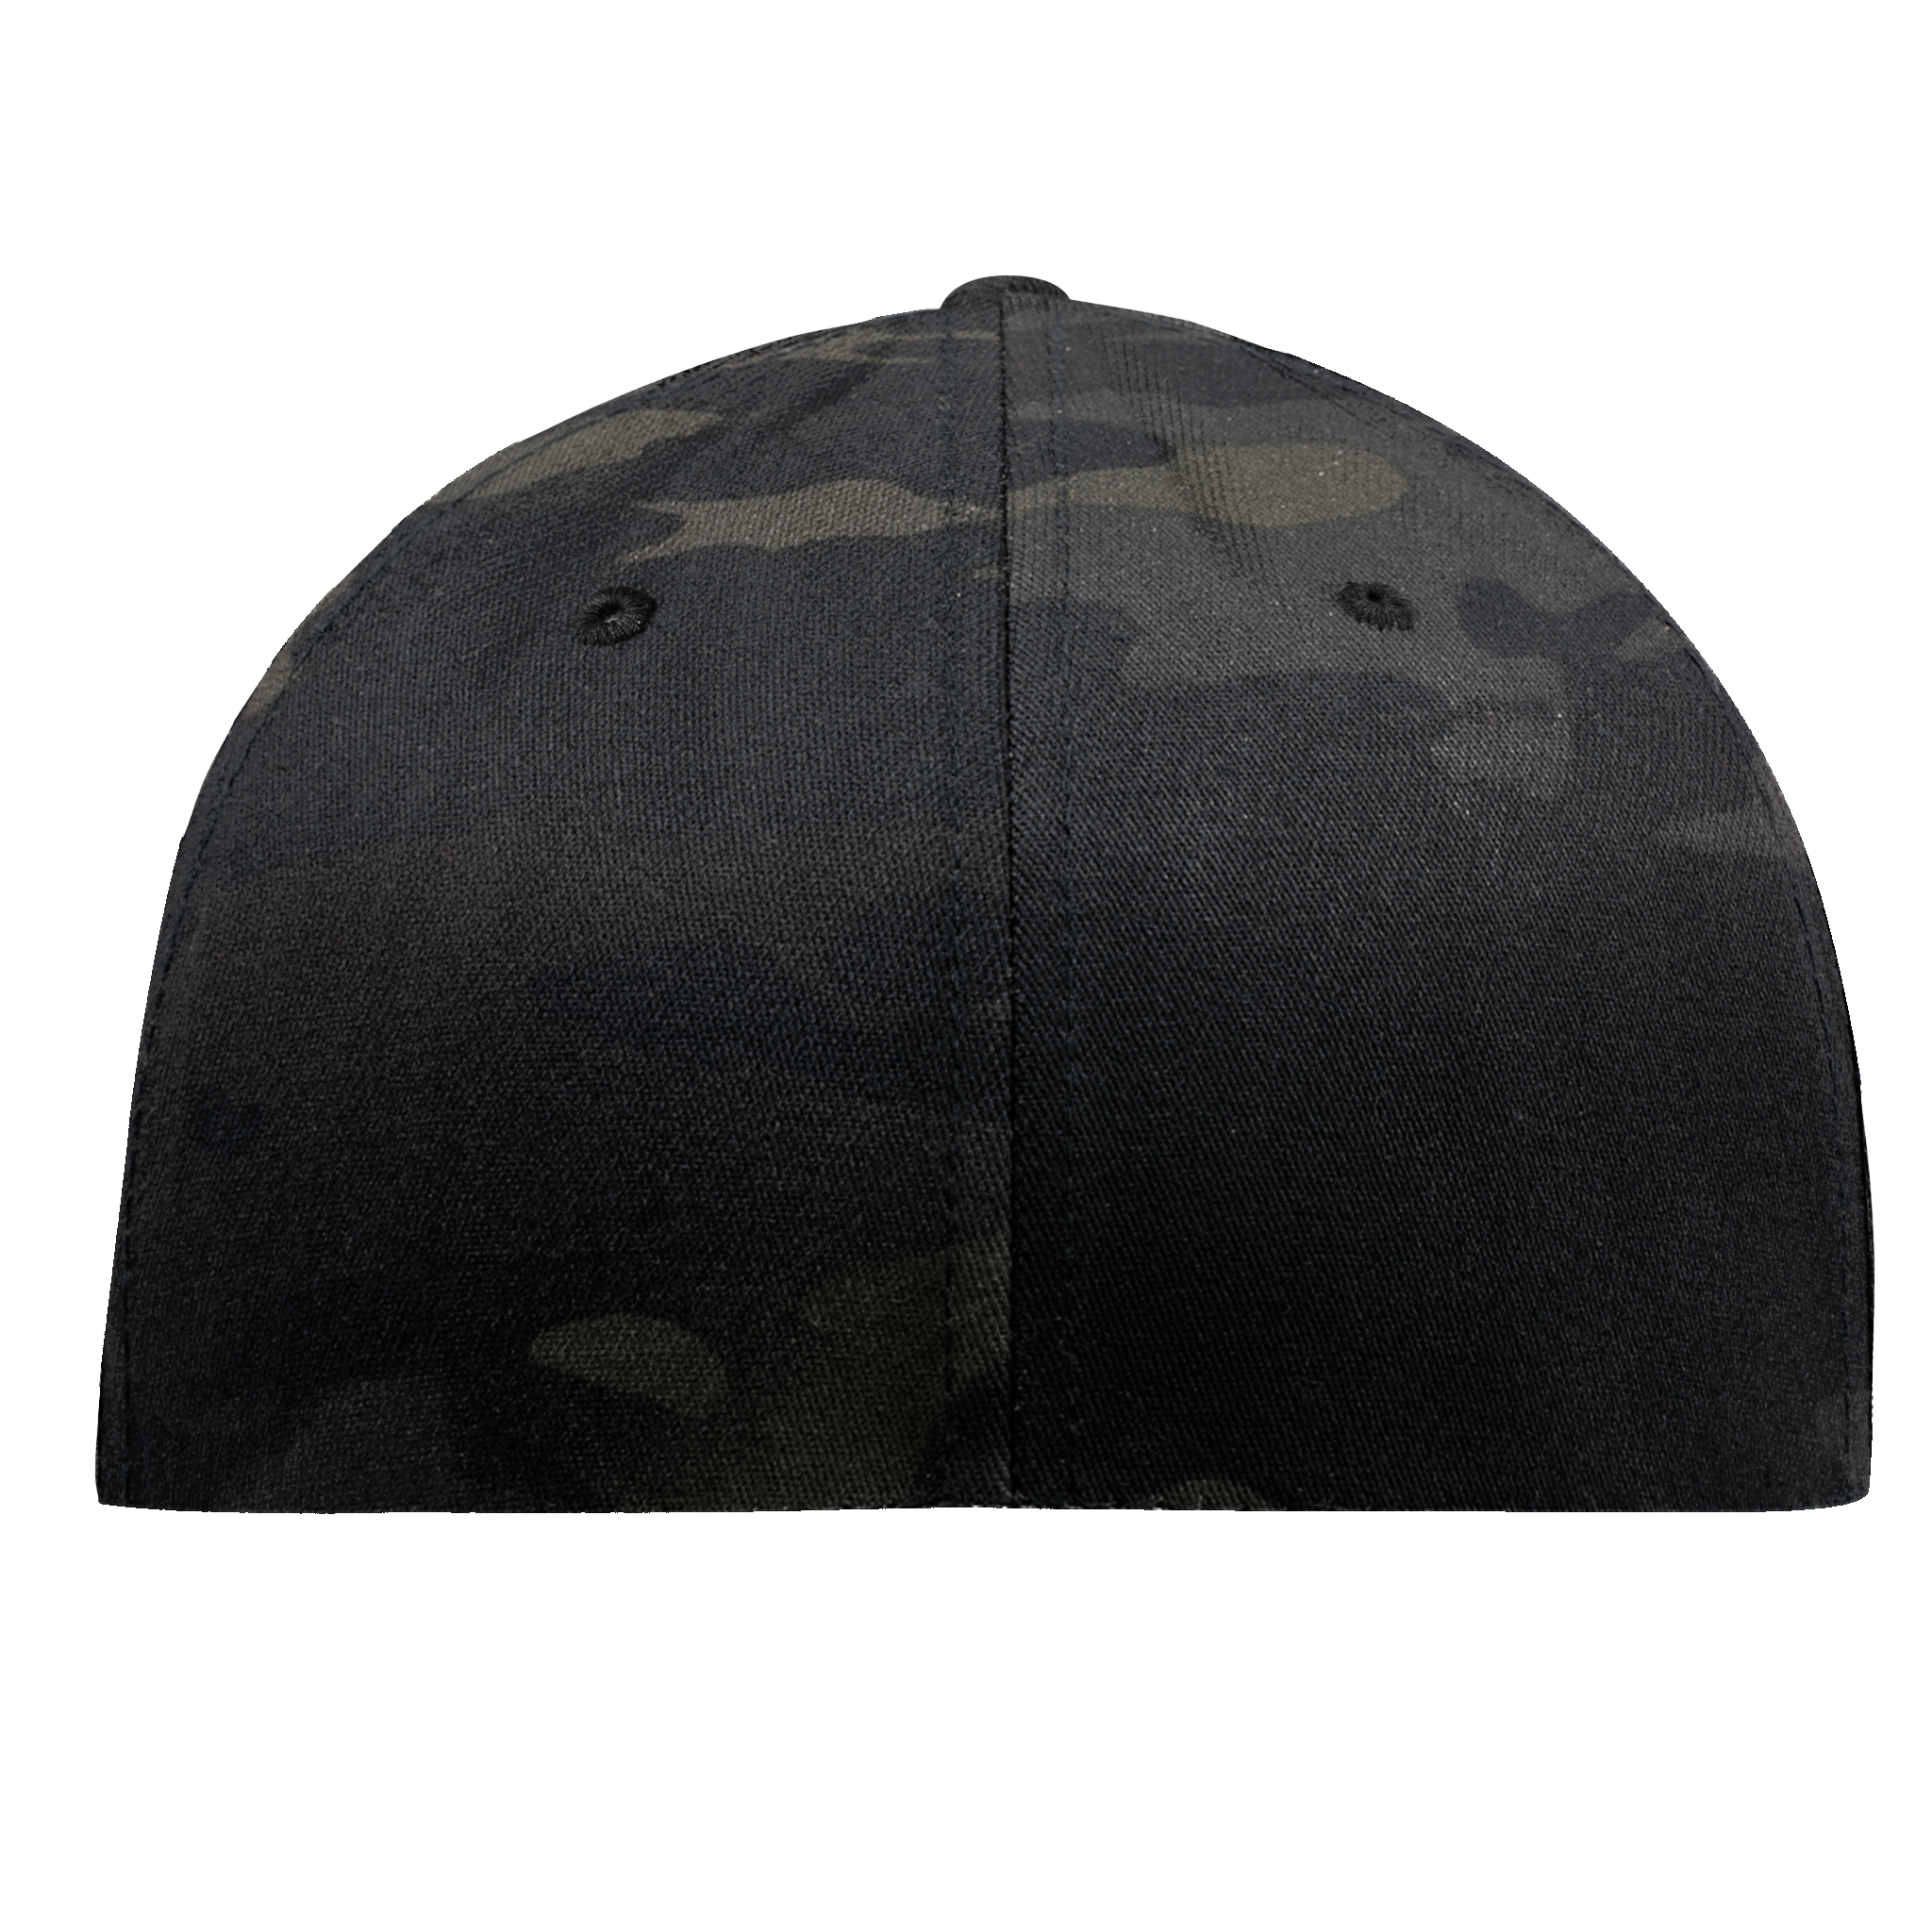 Old Glory Midnight Flexfit Fitted Back Multicam